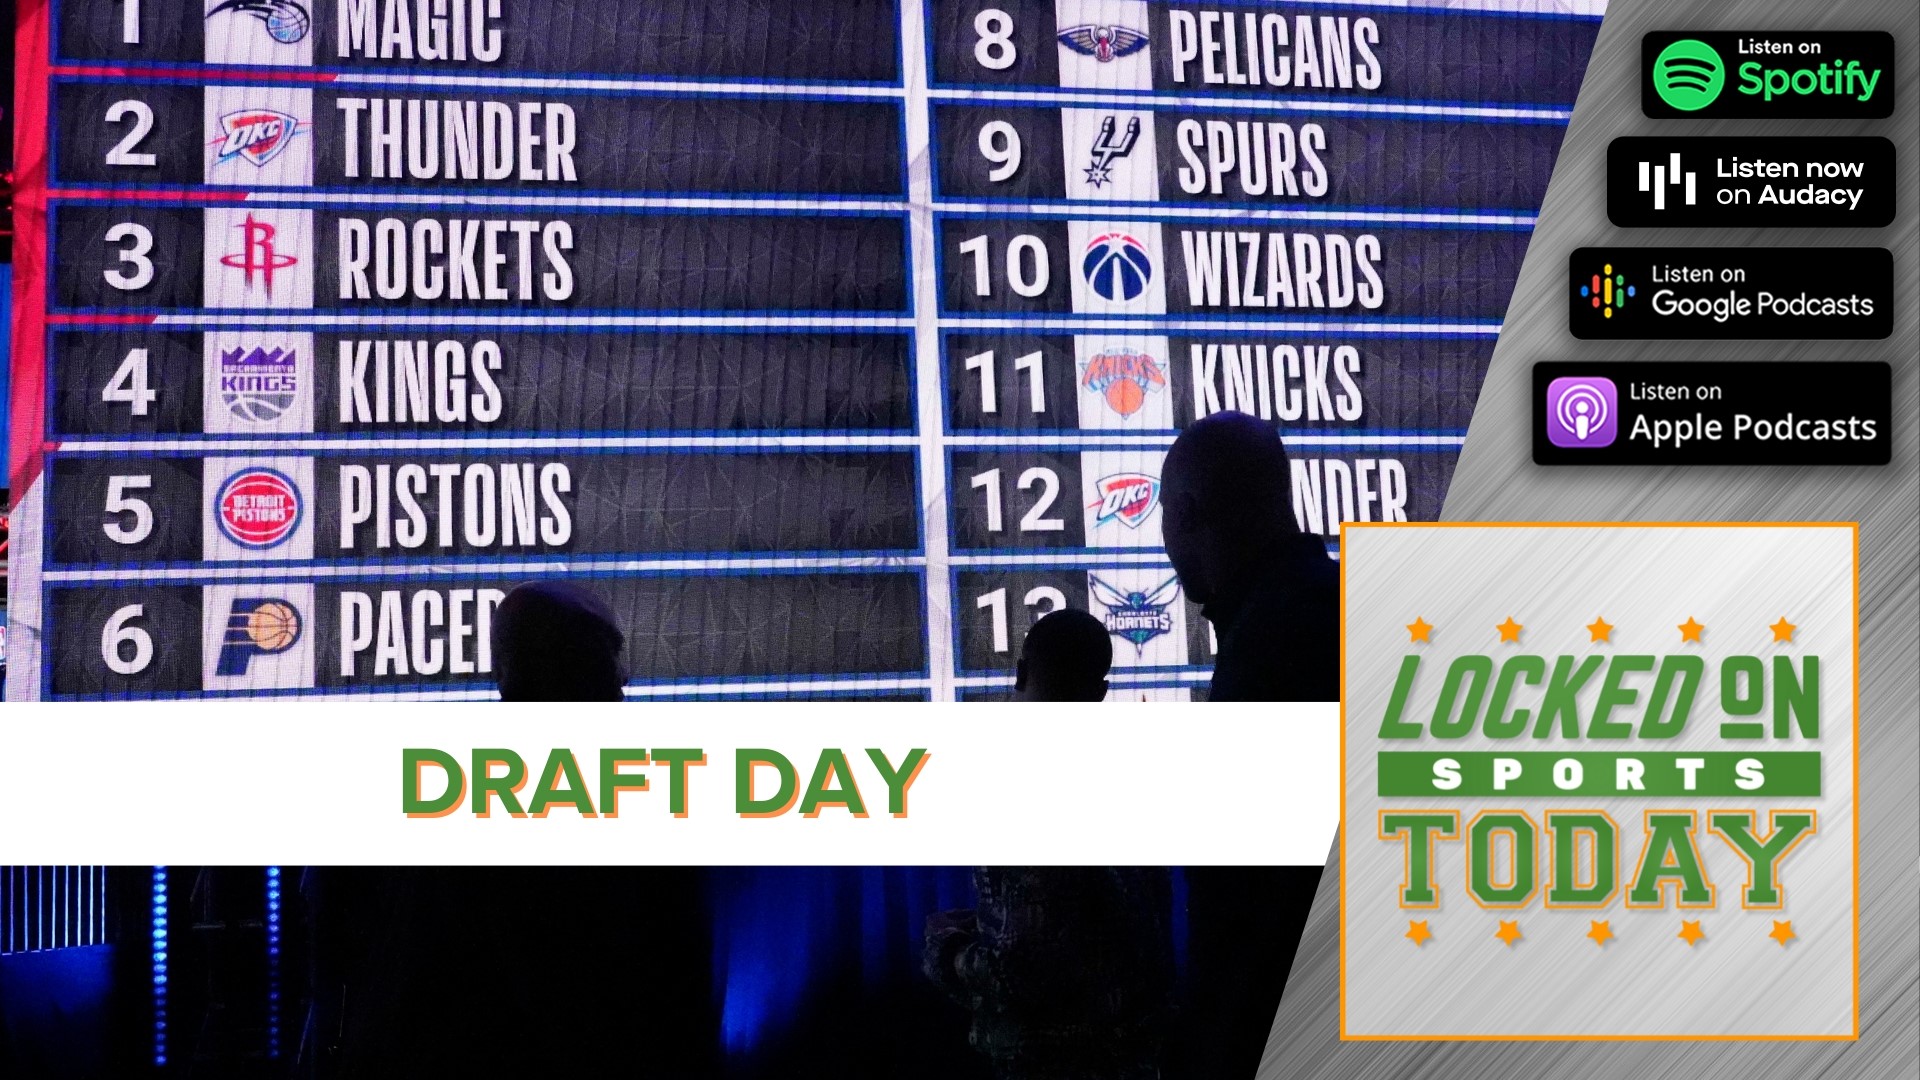 Discussing the day's top sports stories from NBA draft day and probable picks, to the Colorado Avalanche being one win away from the Stanley Cup.